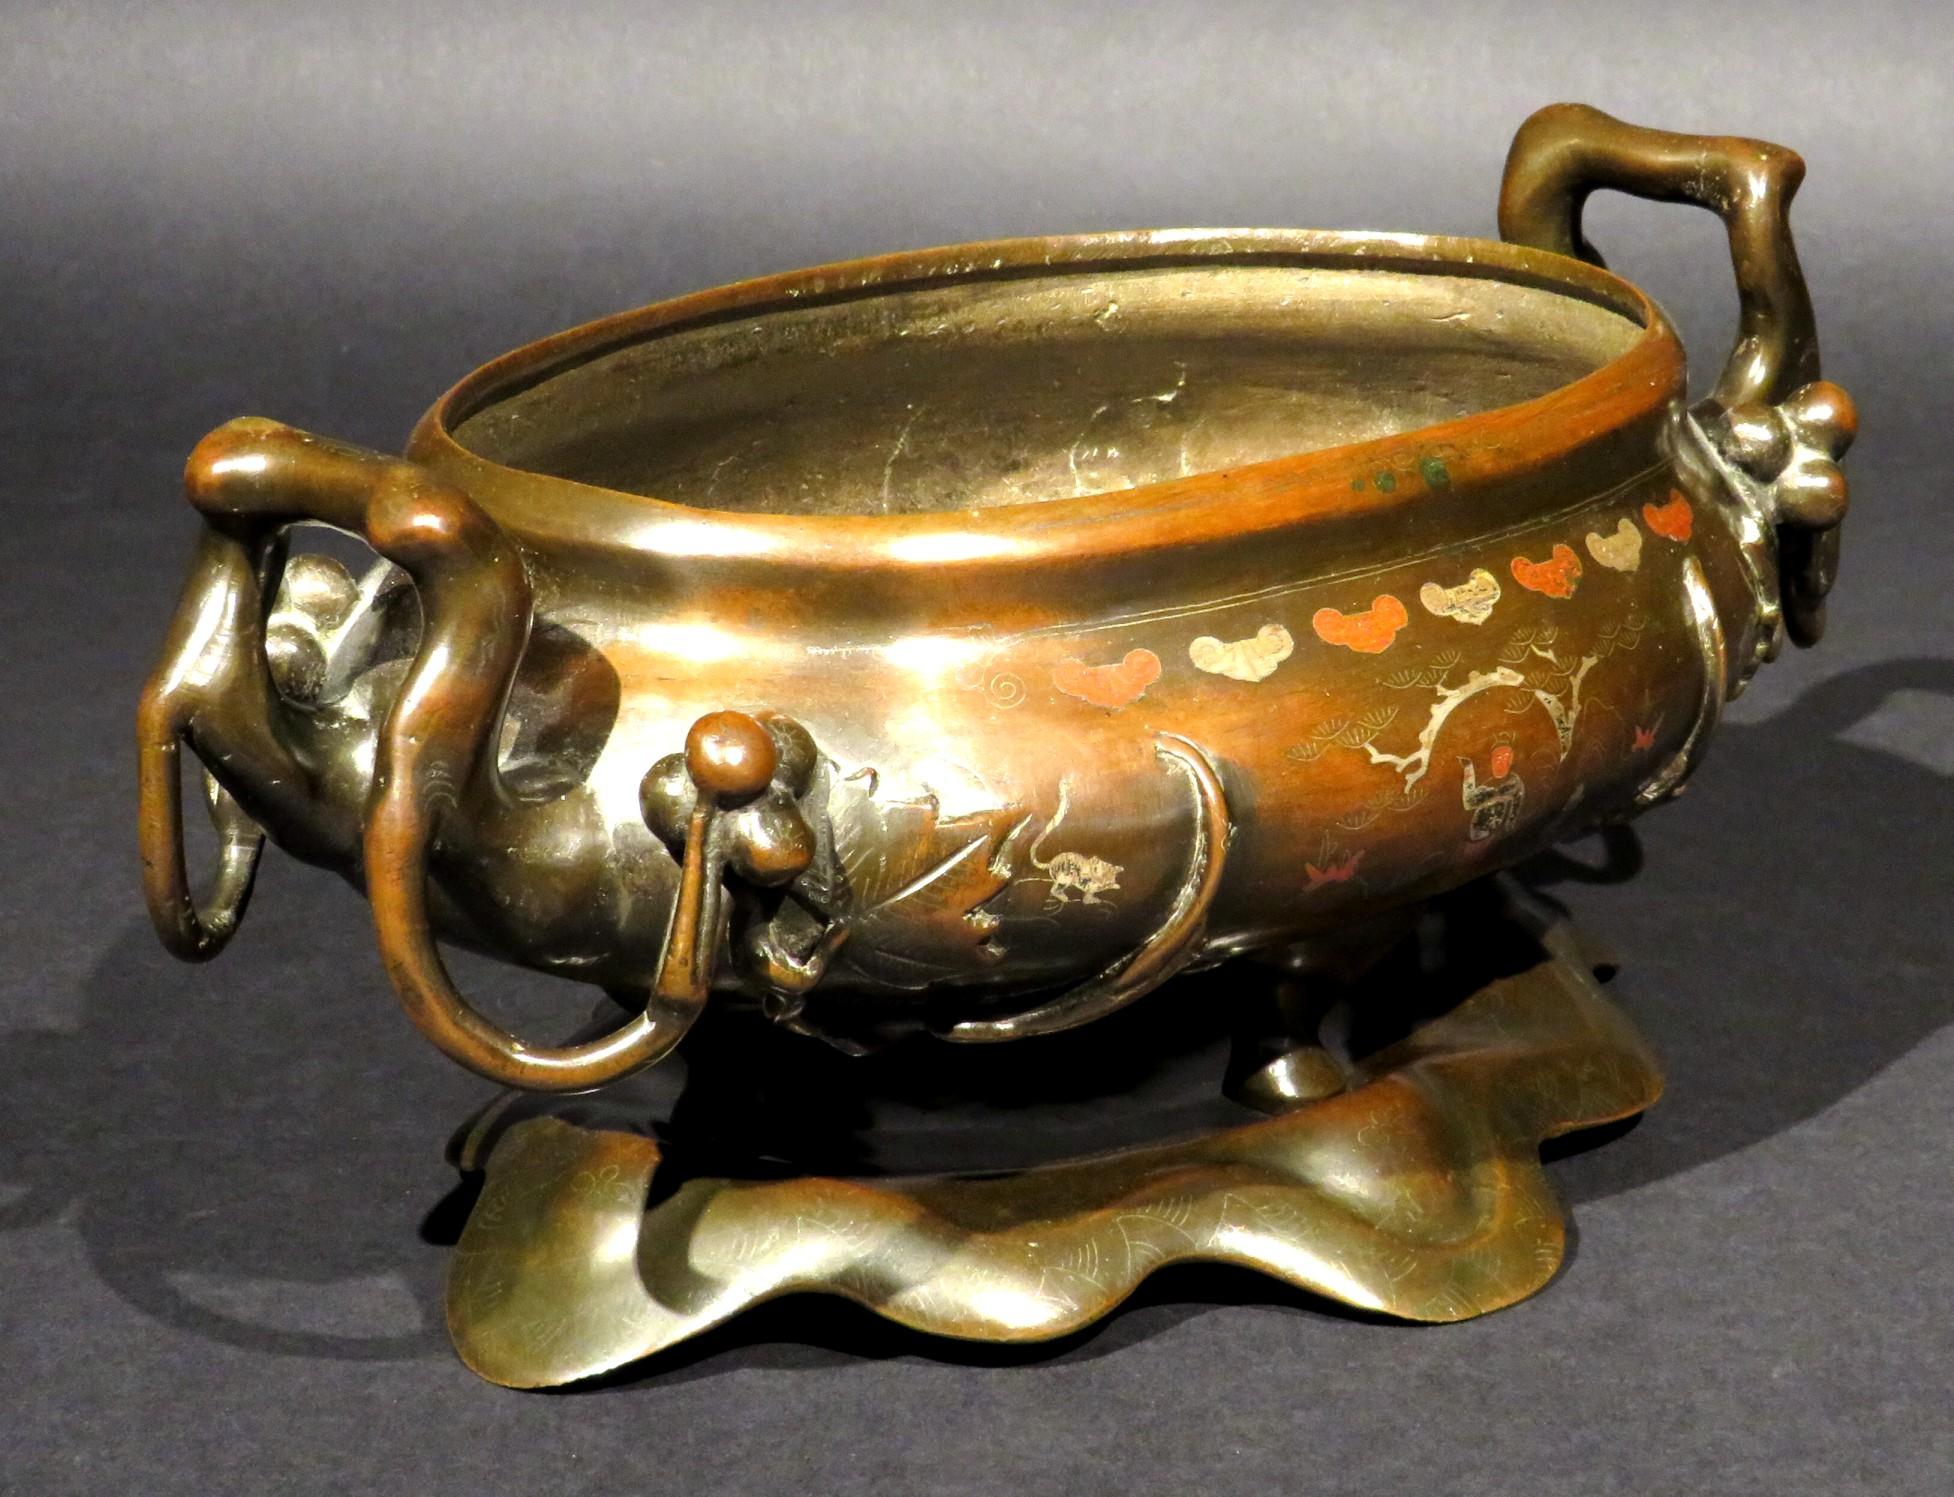 20th Century A Very Fine Japanese Mixed Metal Bronze Doban / Suiban, Meiji Period (1868-1912) For Sale